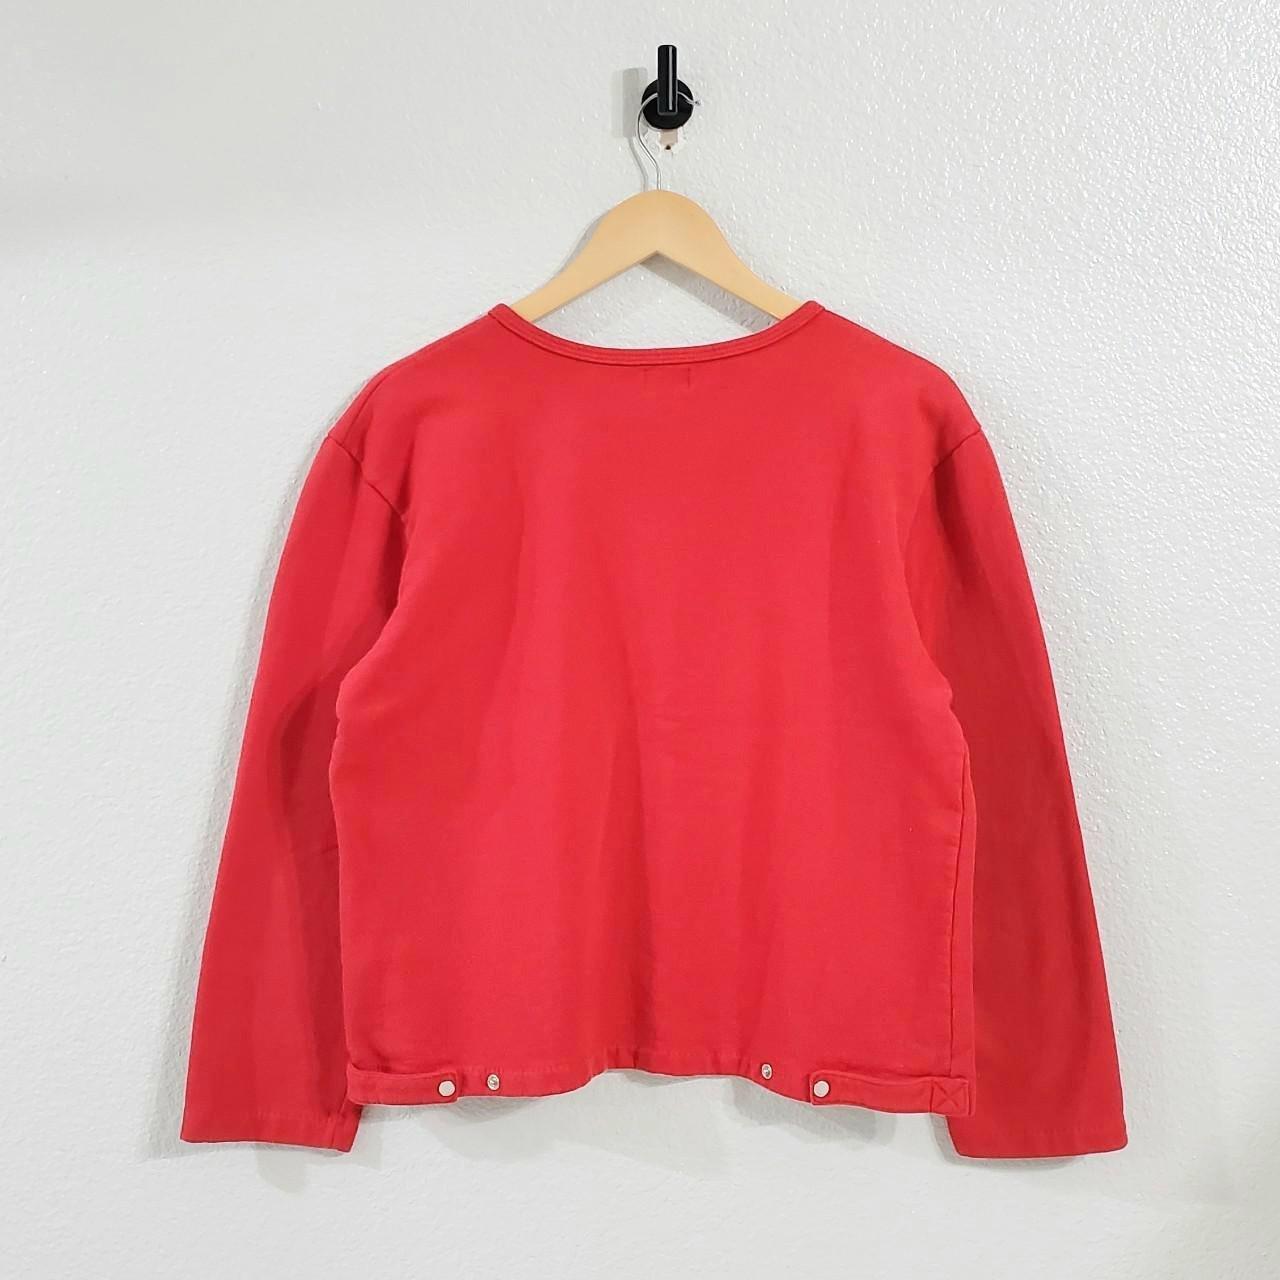 Guess Women's Red and White Jumper (2)